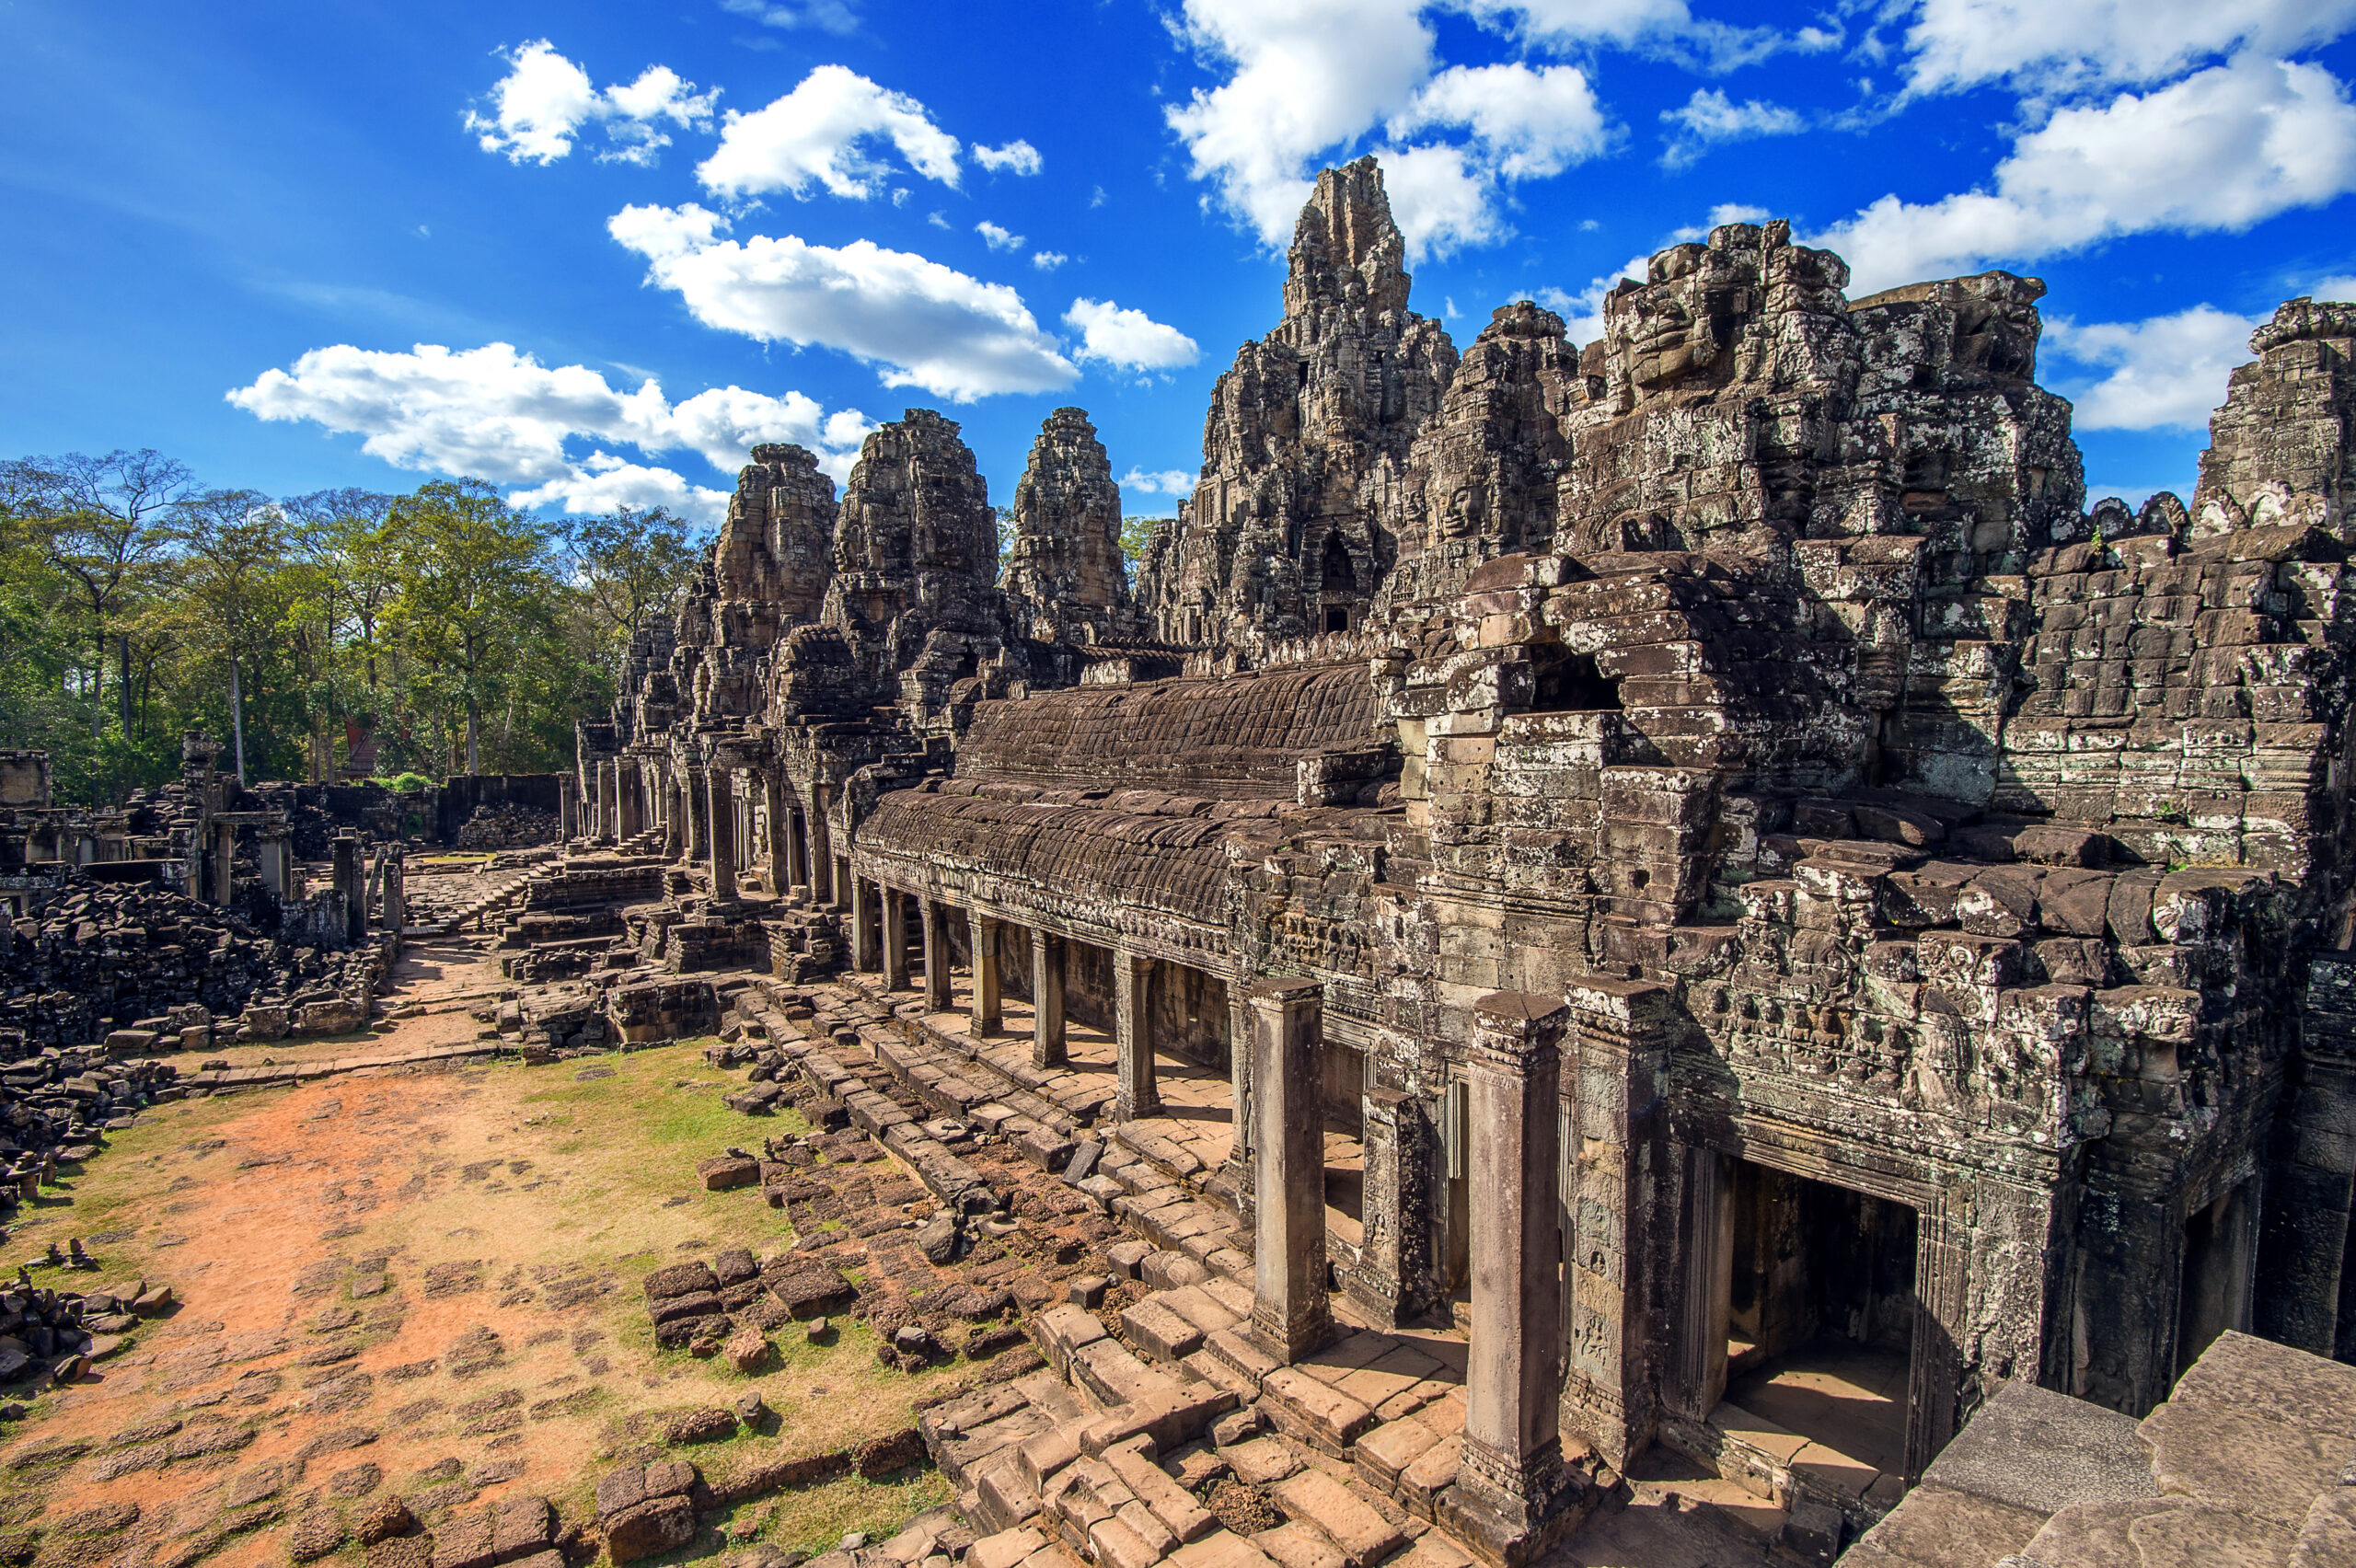 https://heyotour.com/wp-content/uploads/2023/11/bayon-temple-with-giant-stone-faces-angkor-wat-siem-reap-cambodia-scaled.jpg